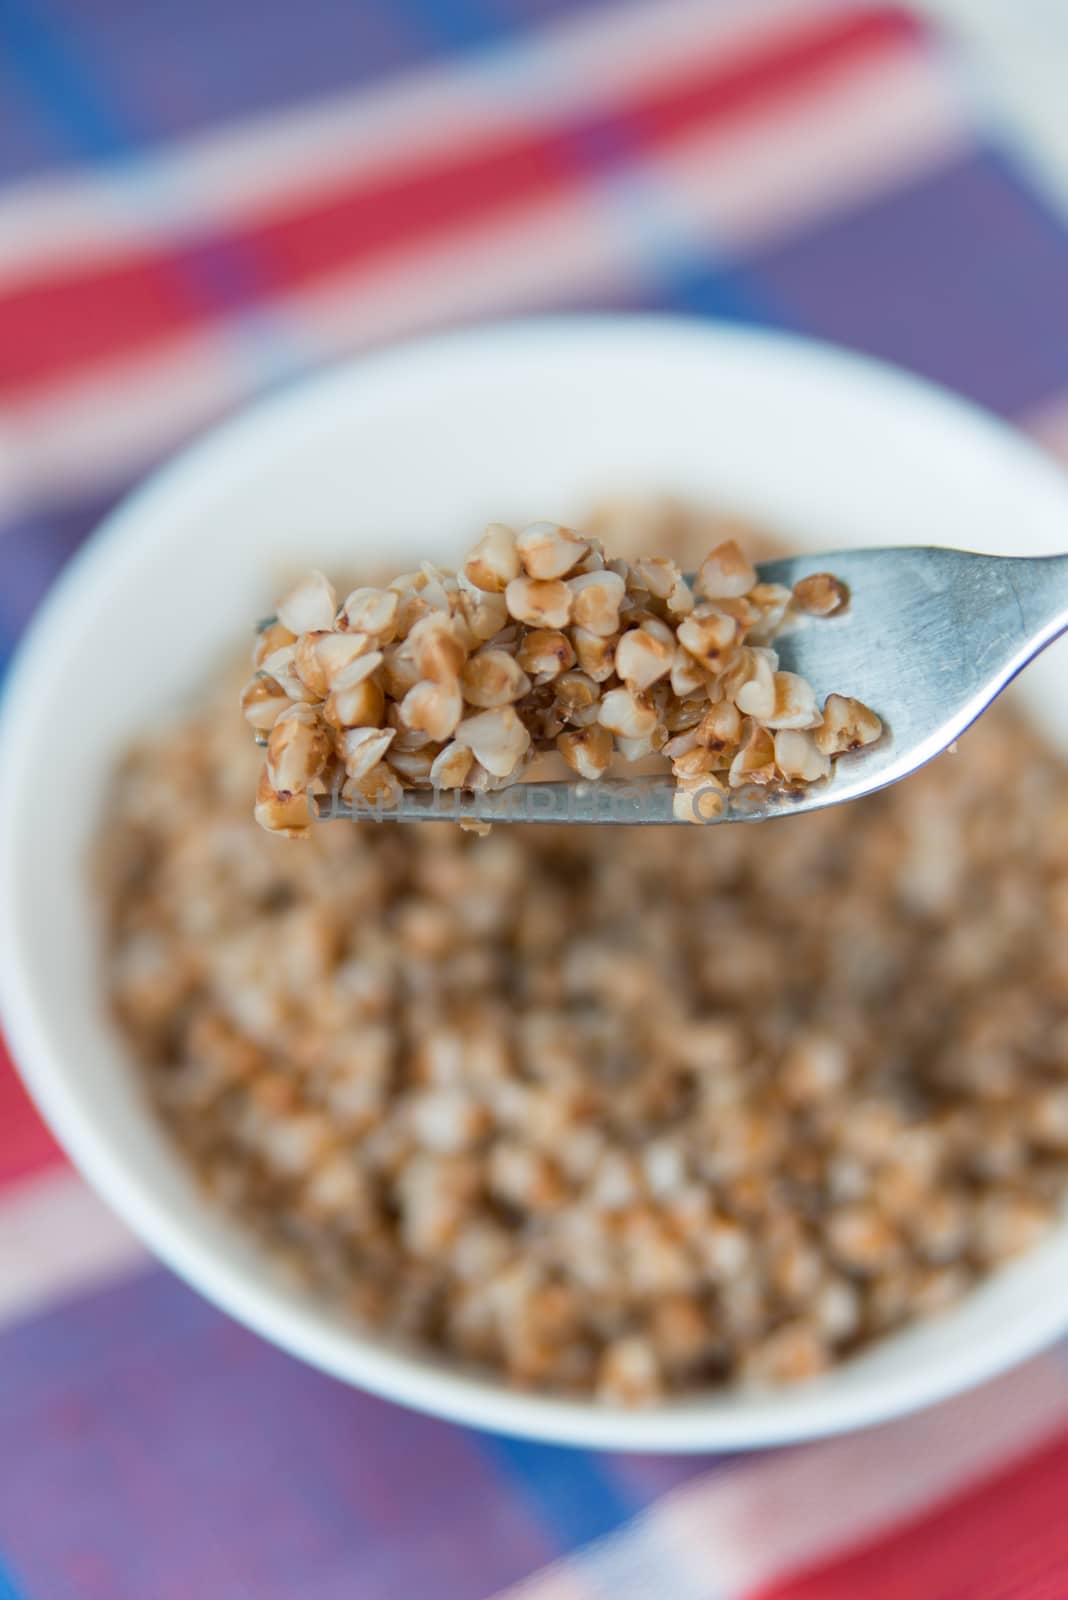 Buckwheat cereal on the fork by Linaga